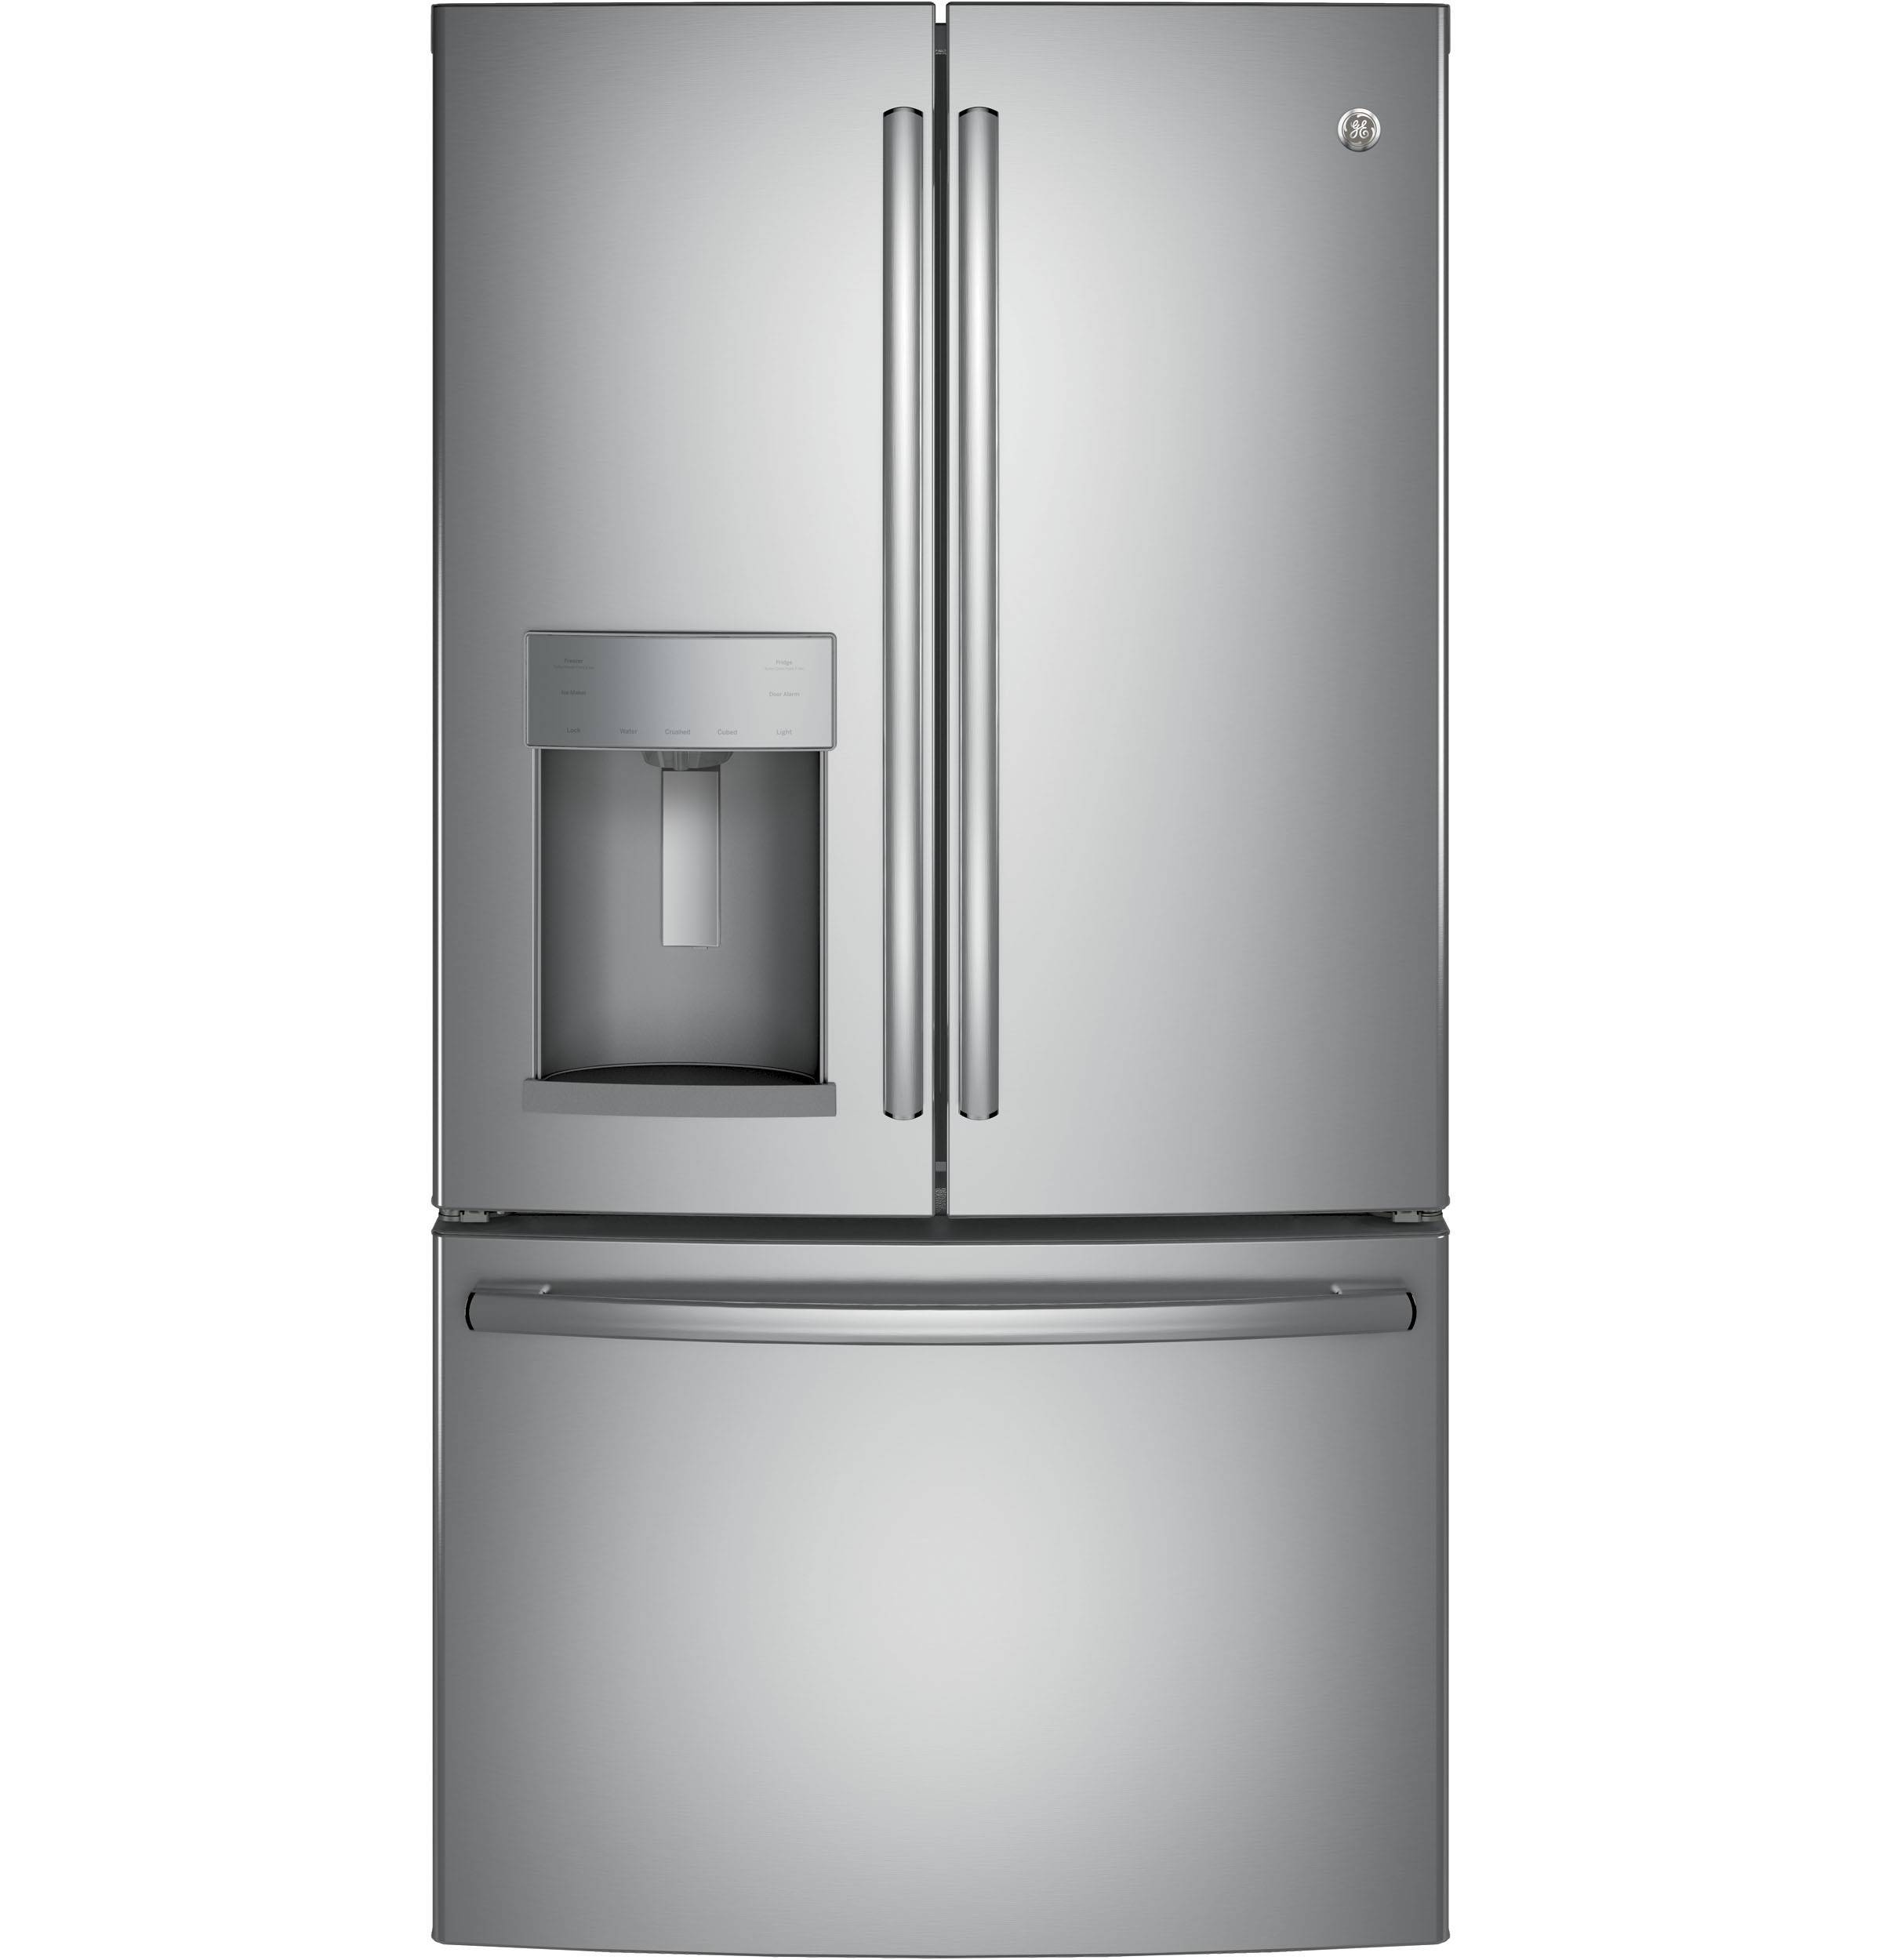 GE 27.8 Cubic-Feet ENERGY STAR-Certified French-Door Refrigerator (Stainless Steel)